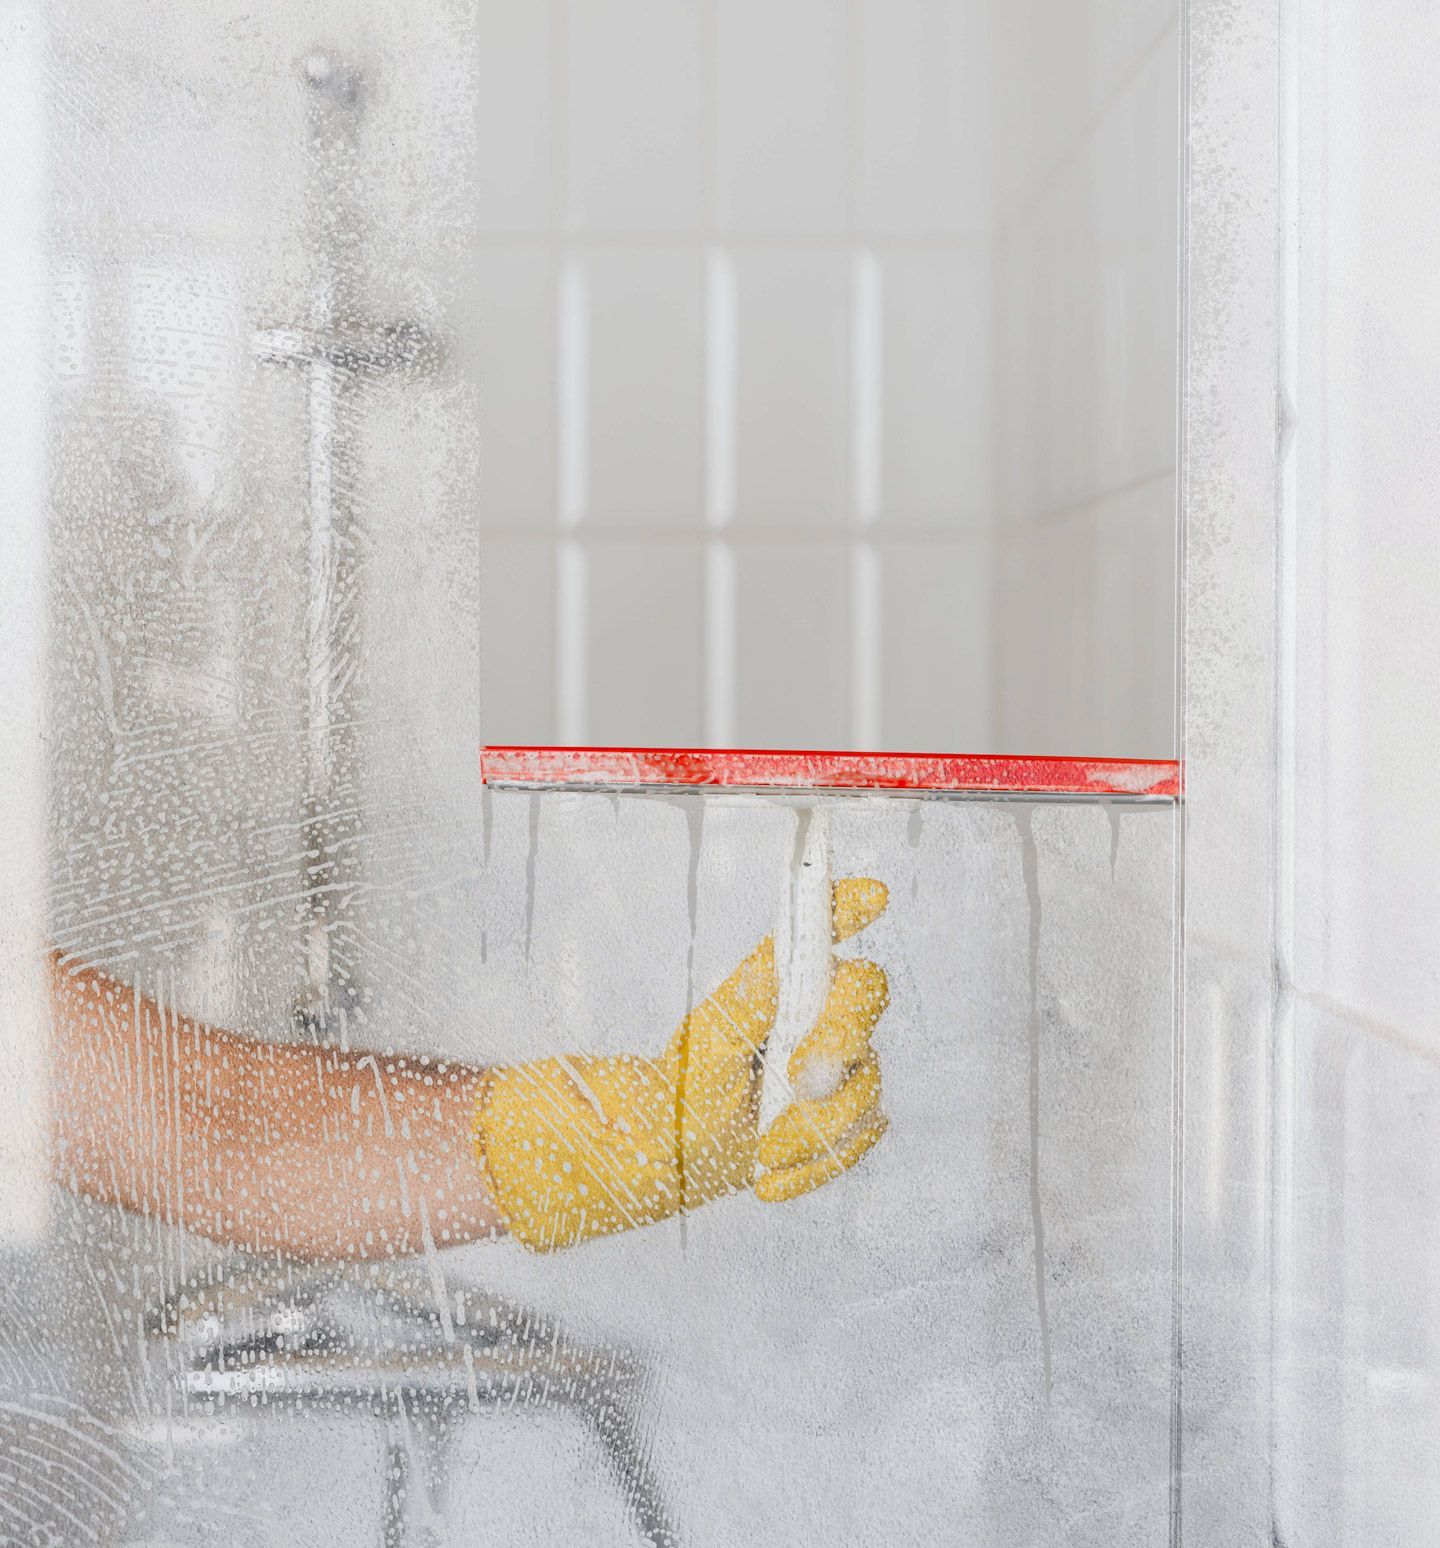 A surprising way to prevent soap scum build-up on glass shower